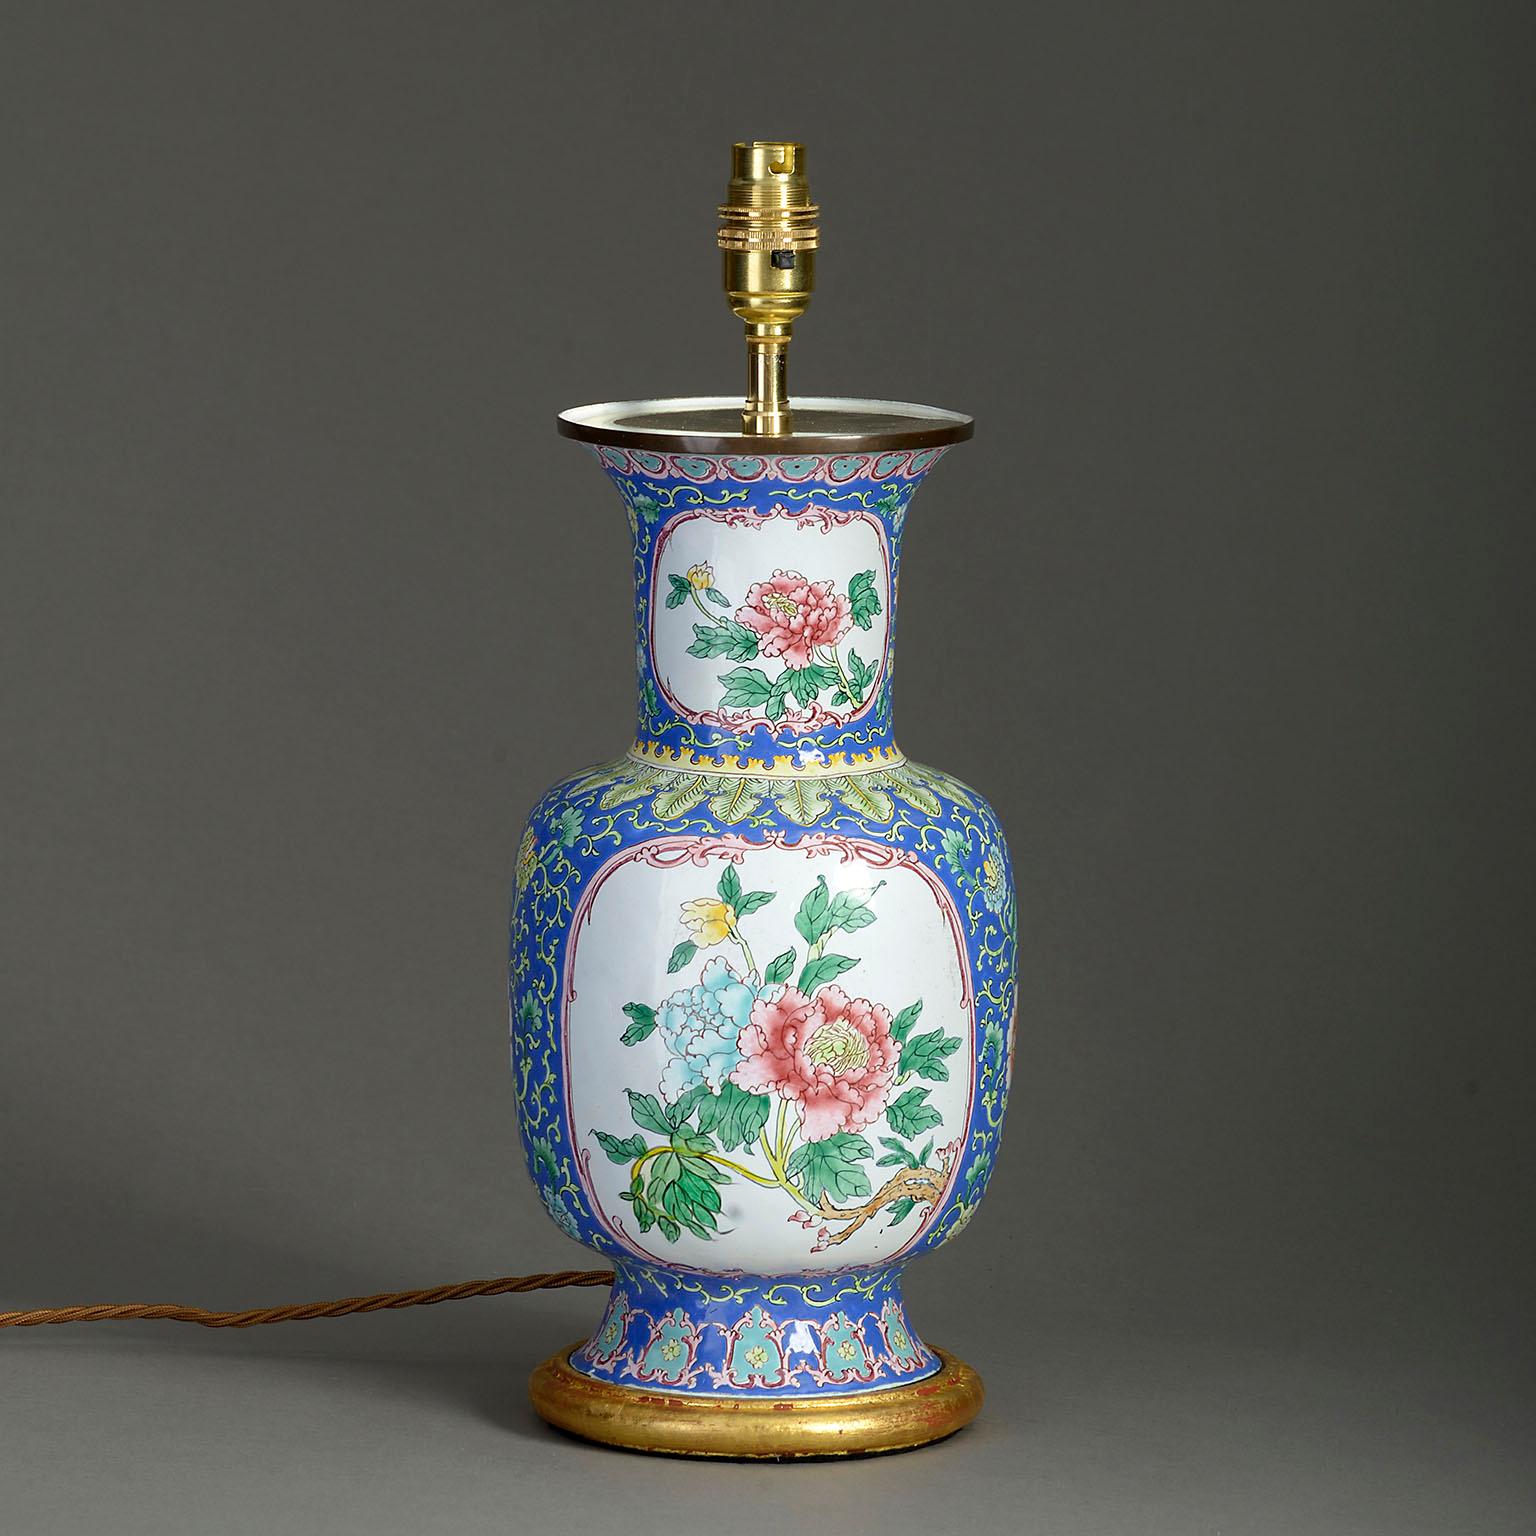 A mid-20th century Canton enamel vase of baluster form, the blue ground with scrolling foliage and set with floral cartouches. Now mounted as a table lamp on a hand-turned water gilded base.

Republic Period.

Dimensions refer to size of enamel